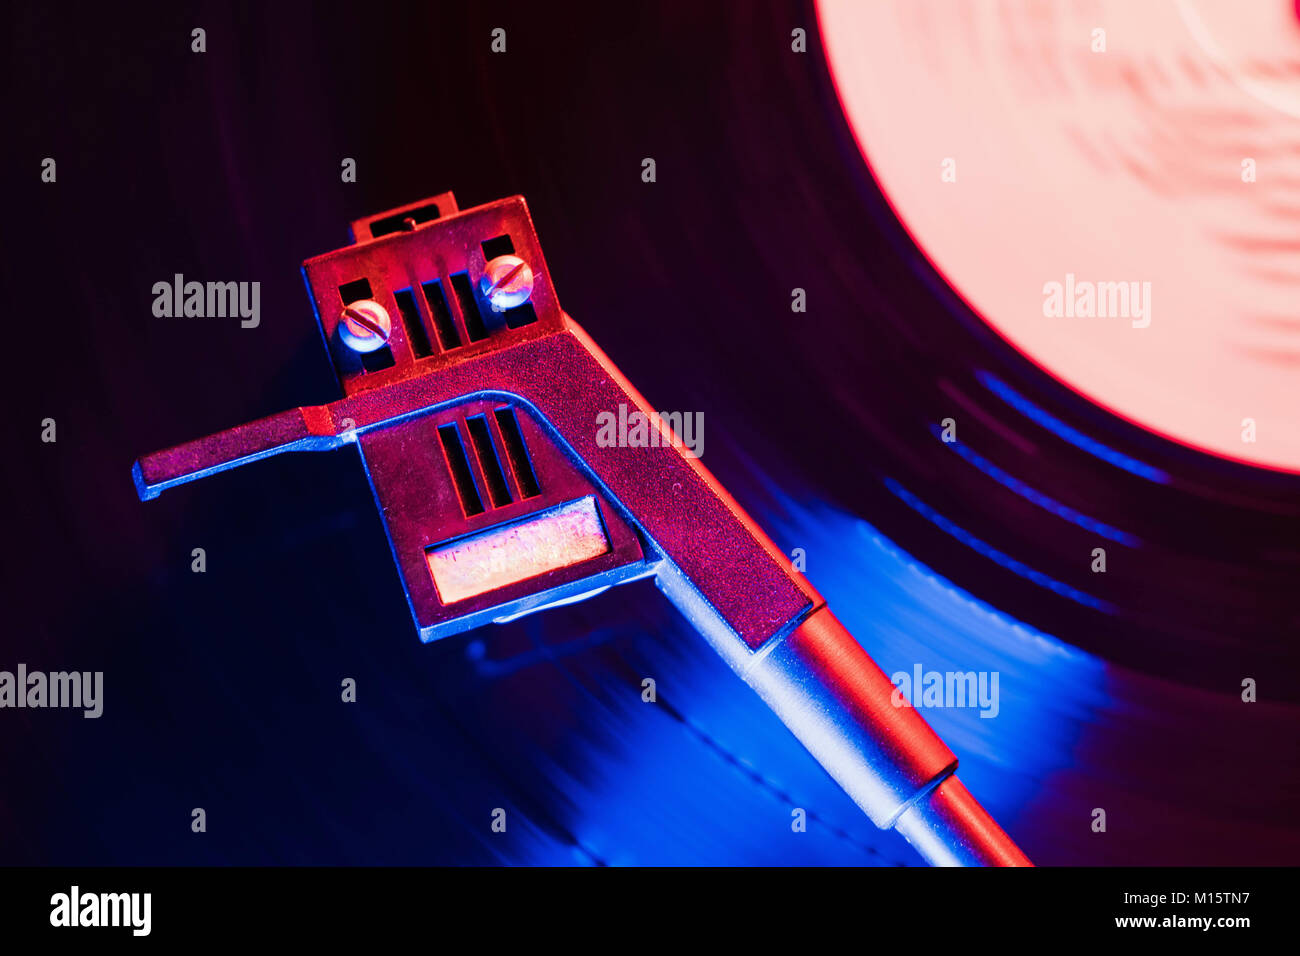 Movie of retro-styled record player spinning vinyl black record. Cinemagraph. Top view. Beautiful neon night colors. Stock Photo